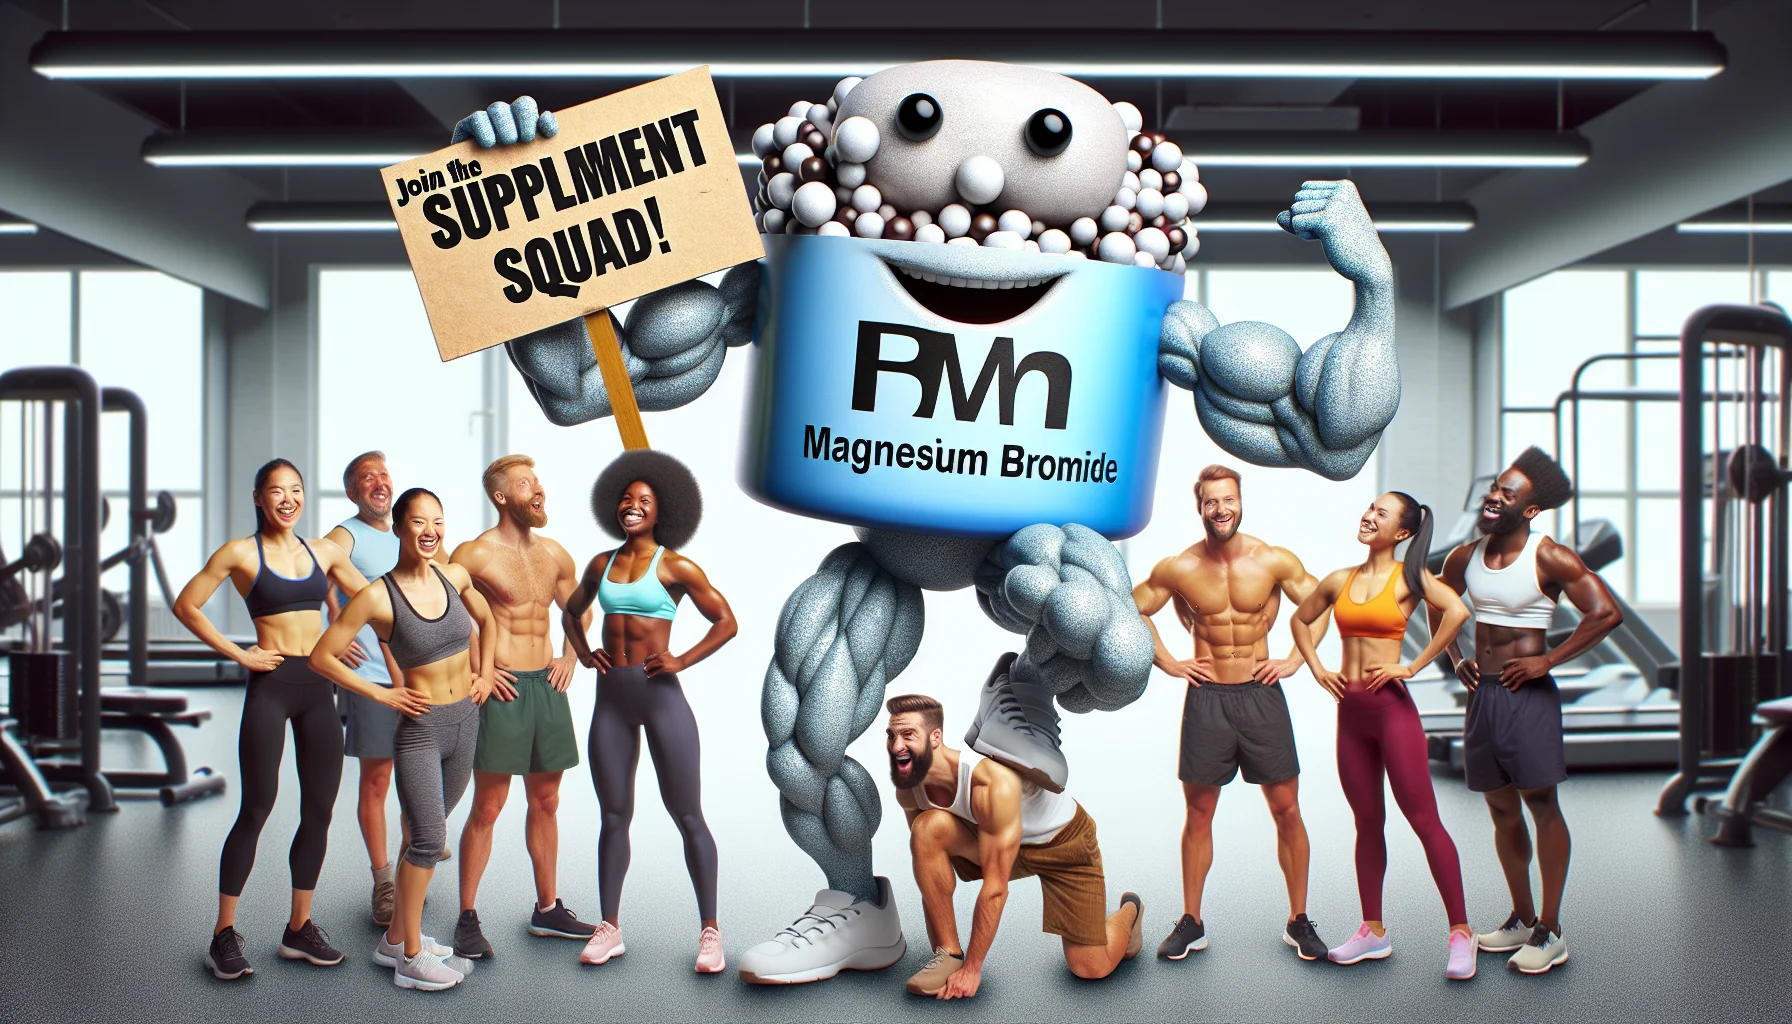 Create a humorous scenario featuring Magnesium Bromide characterized as an energetic gym trainer. This imaginary figure is composed of the magnesium and bromide ions, complete with a human physique and a playful smile on its face. It's convincingly motivating a diverse group of gym-goers, of different genders and descents such as Caucasian, Black, Hispanic, Middle Eastern, and South-Asian people. The magnesium bromide character is holding a sign that reads, 'Join the Supplement Squad!' underlining the message about the importance of sports supplements.